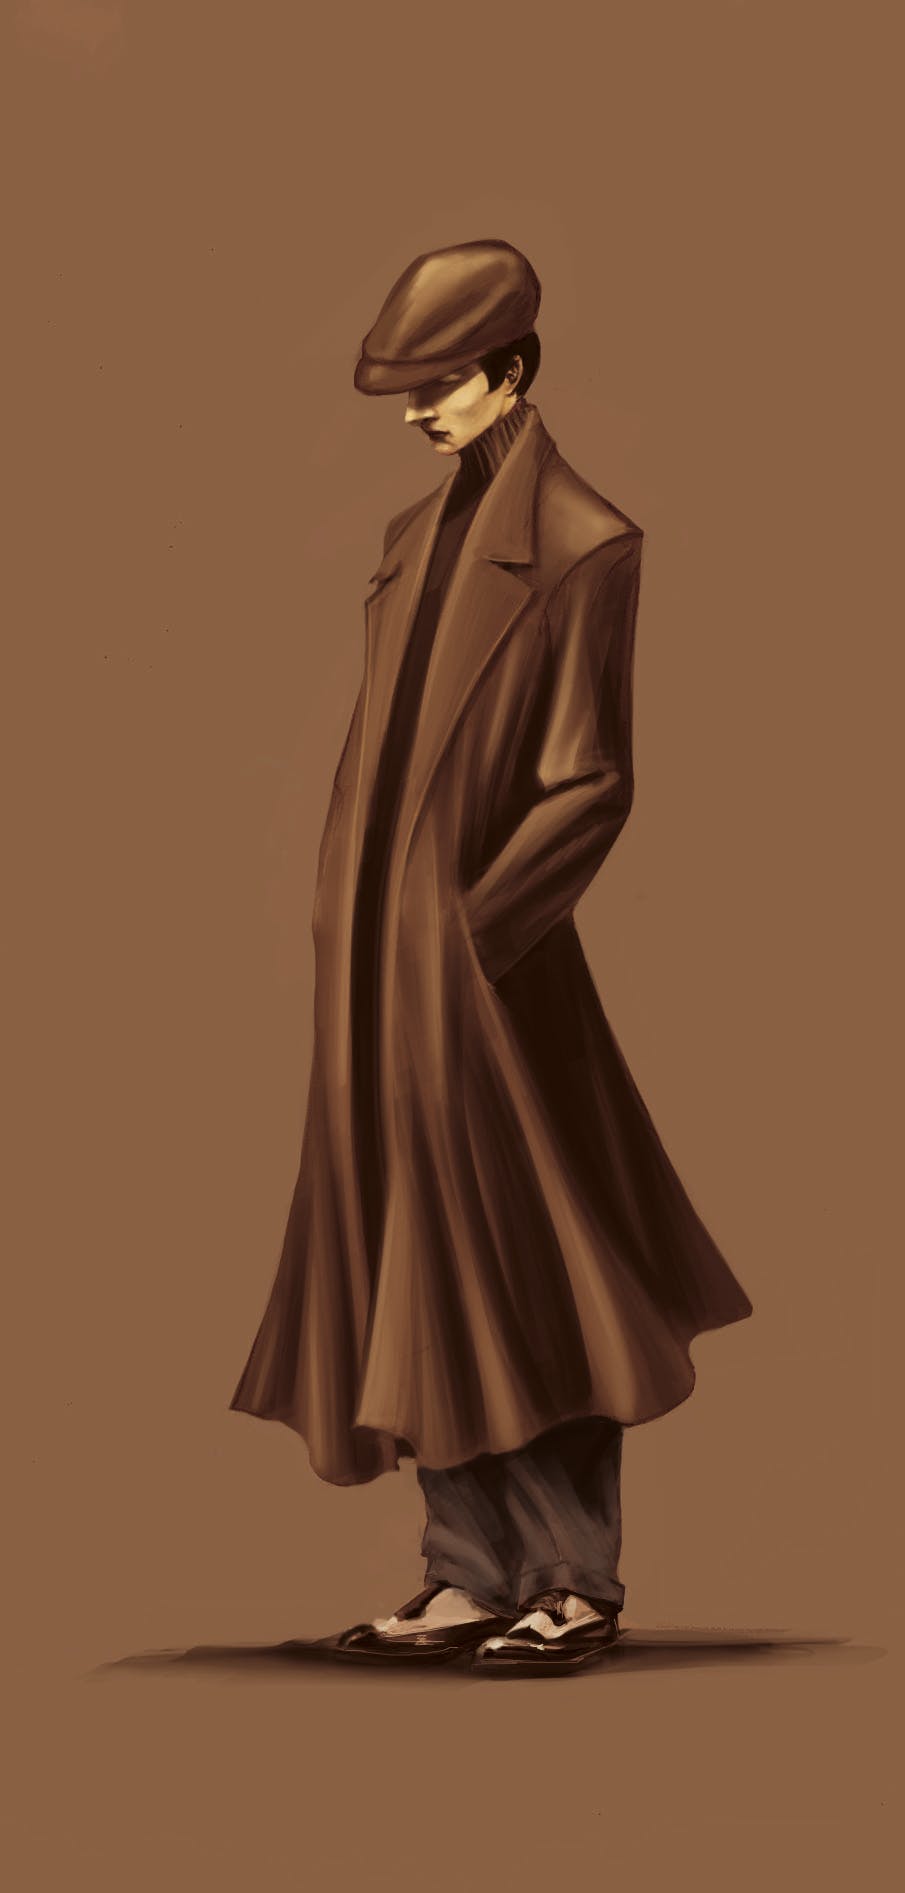 Illustration of a man in a trench coat